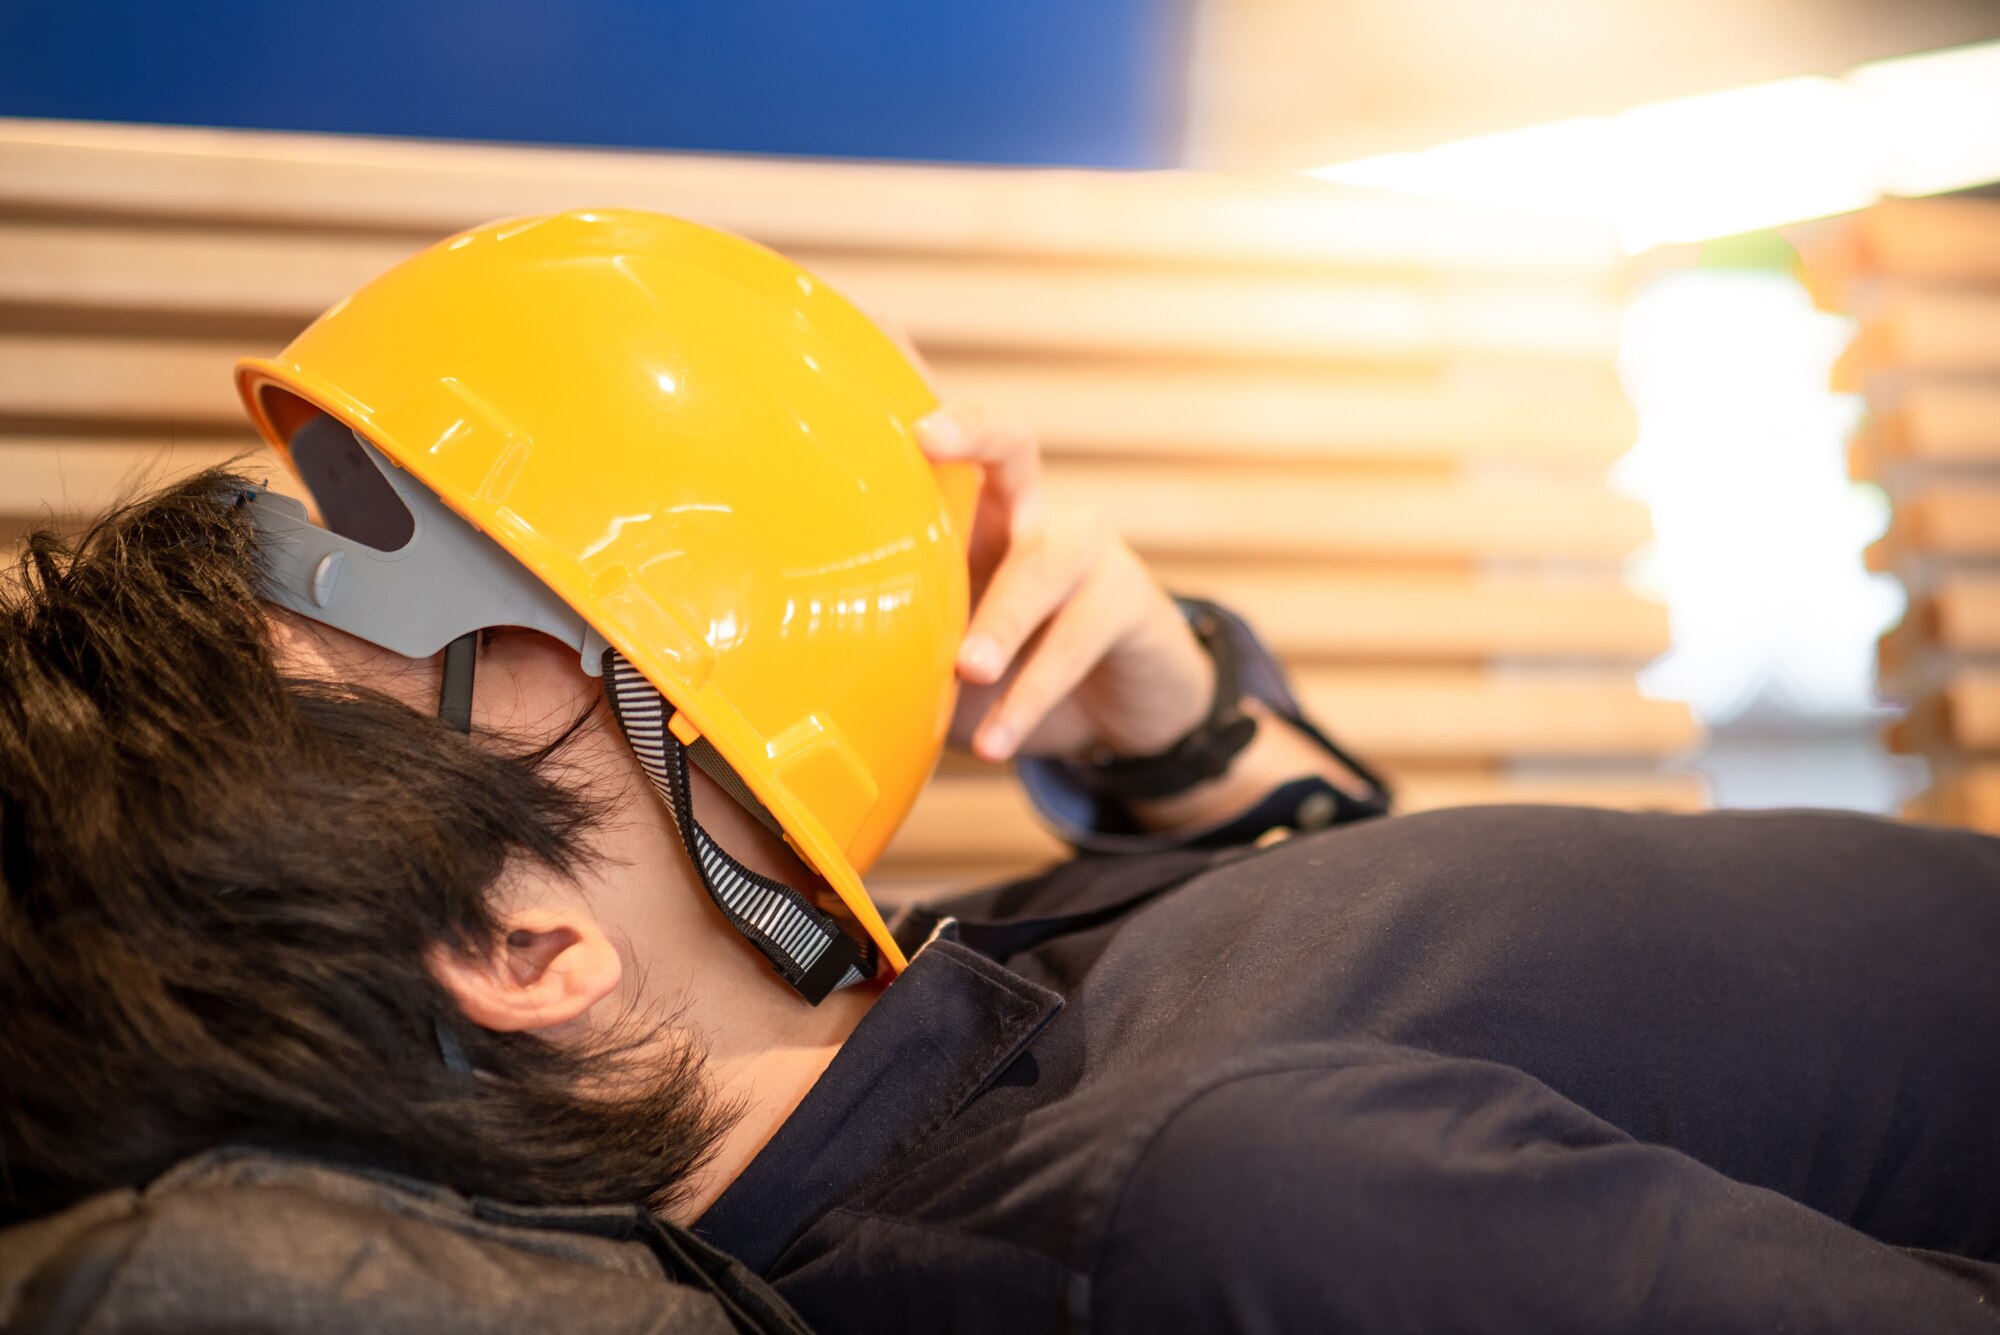 Photo shows laborer sleeping with hardhat laying across face.